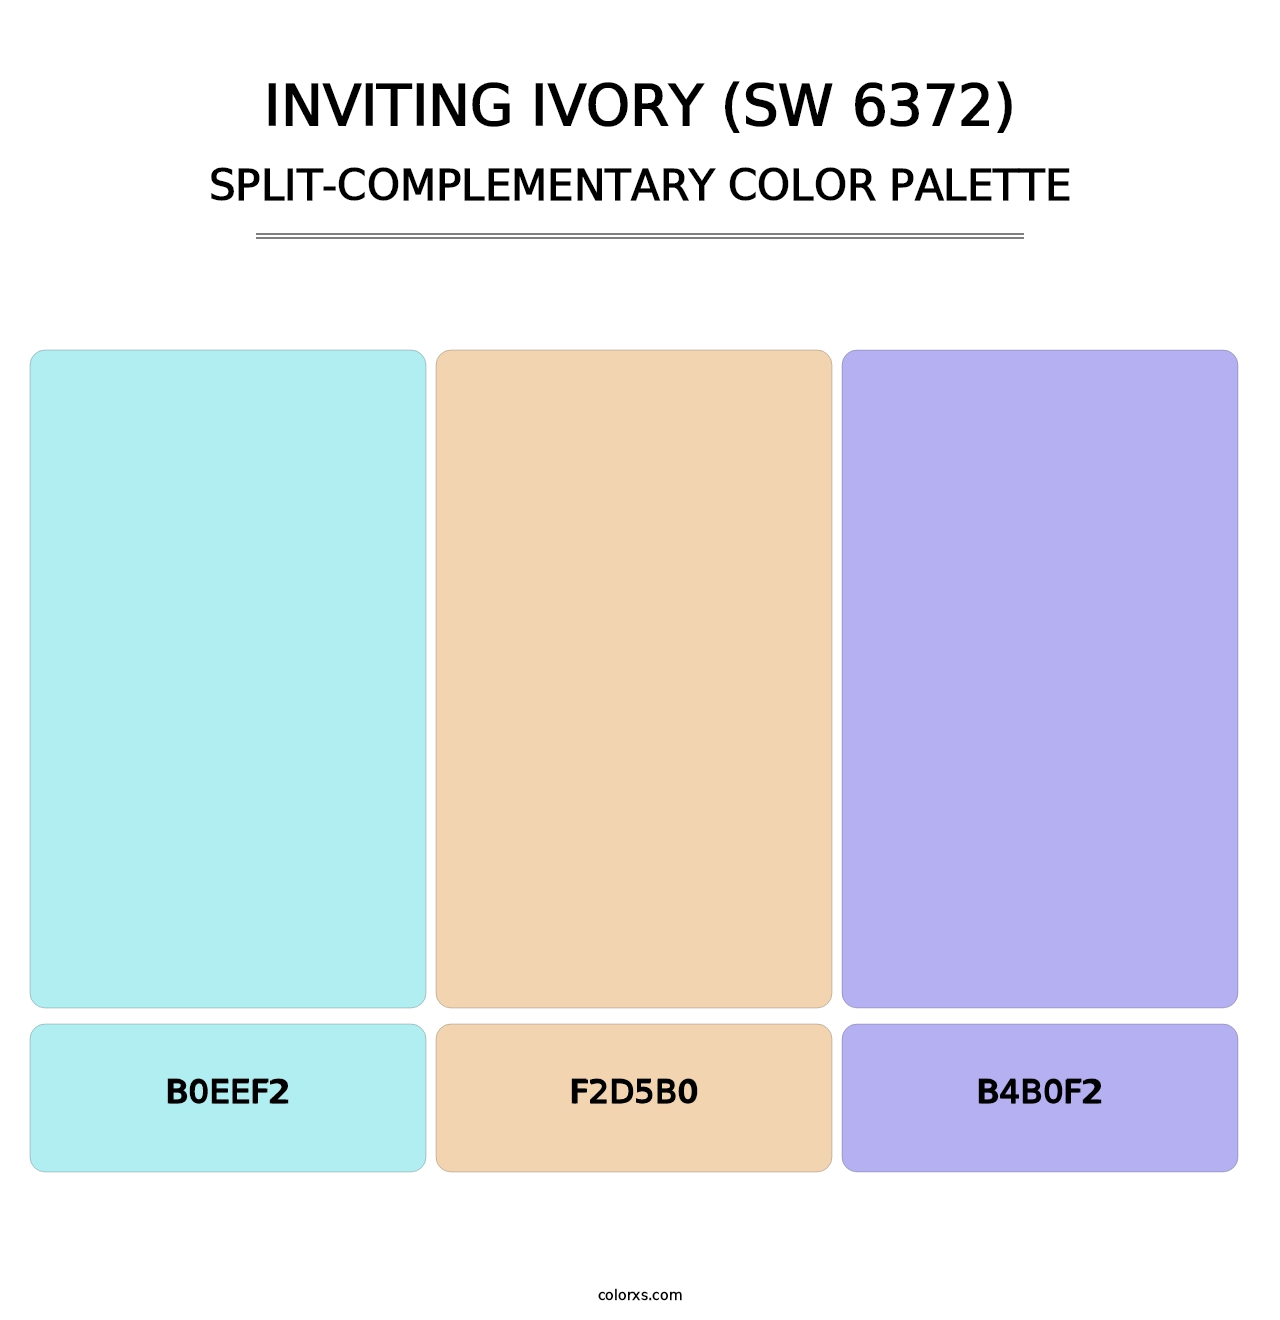 Inviting Ivory (SW 6372) - Split-Complementary Color Palette